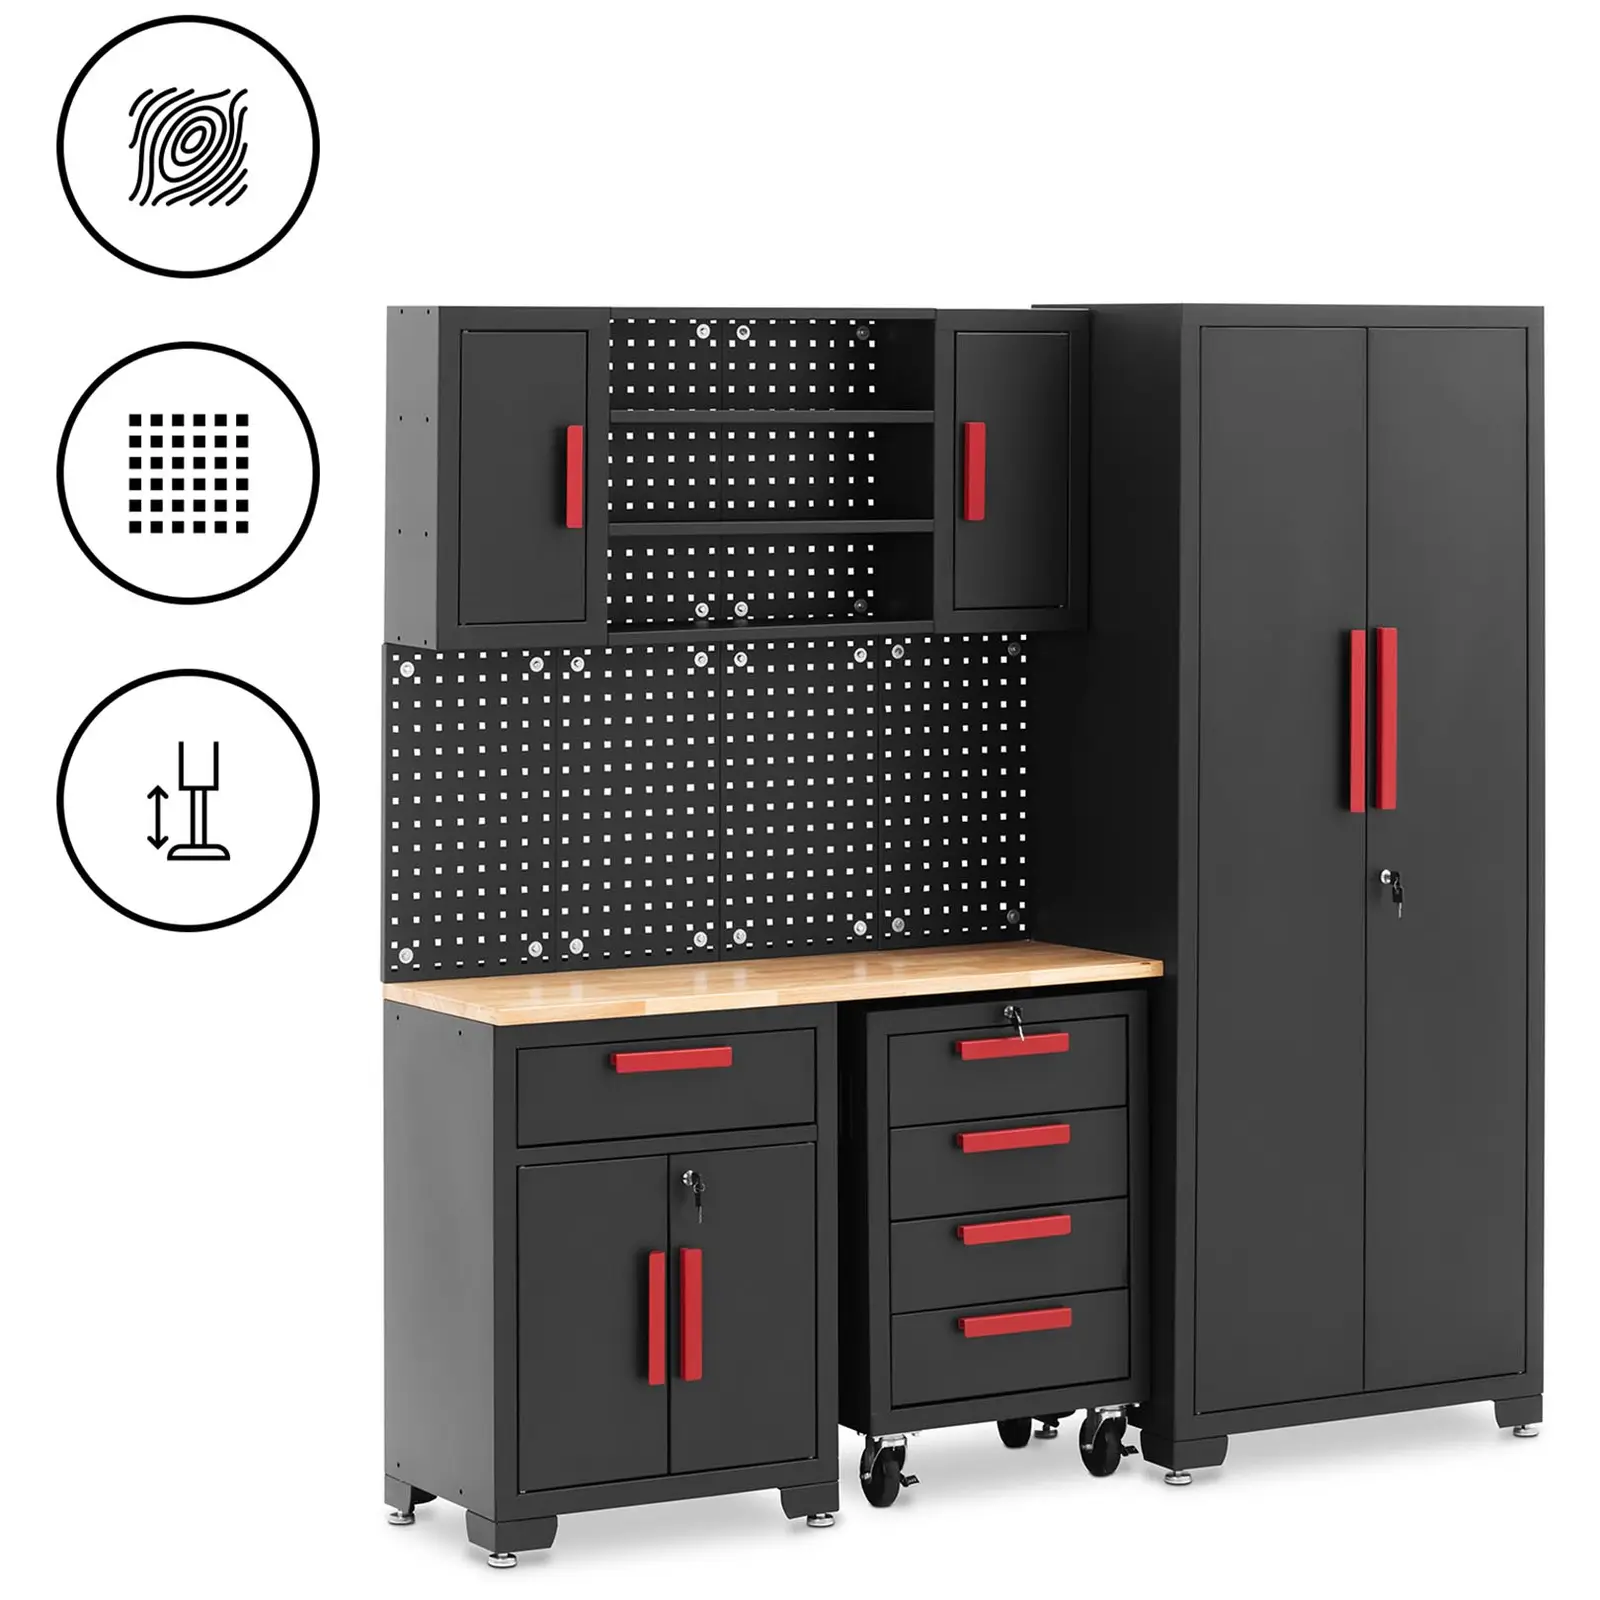 Tool Cabinet - modular - 120.3 x 42.7 x 2.5 cm top - perforated wall - roller container - lockable